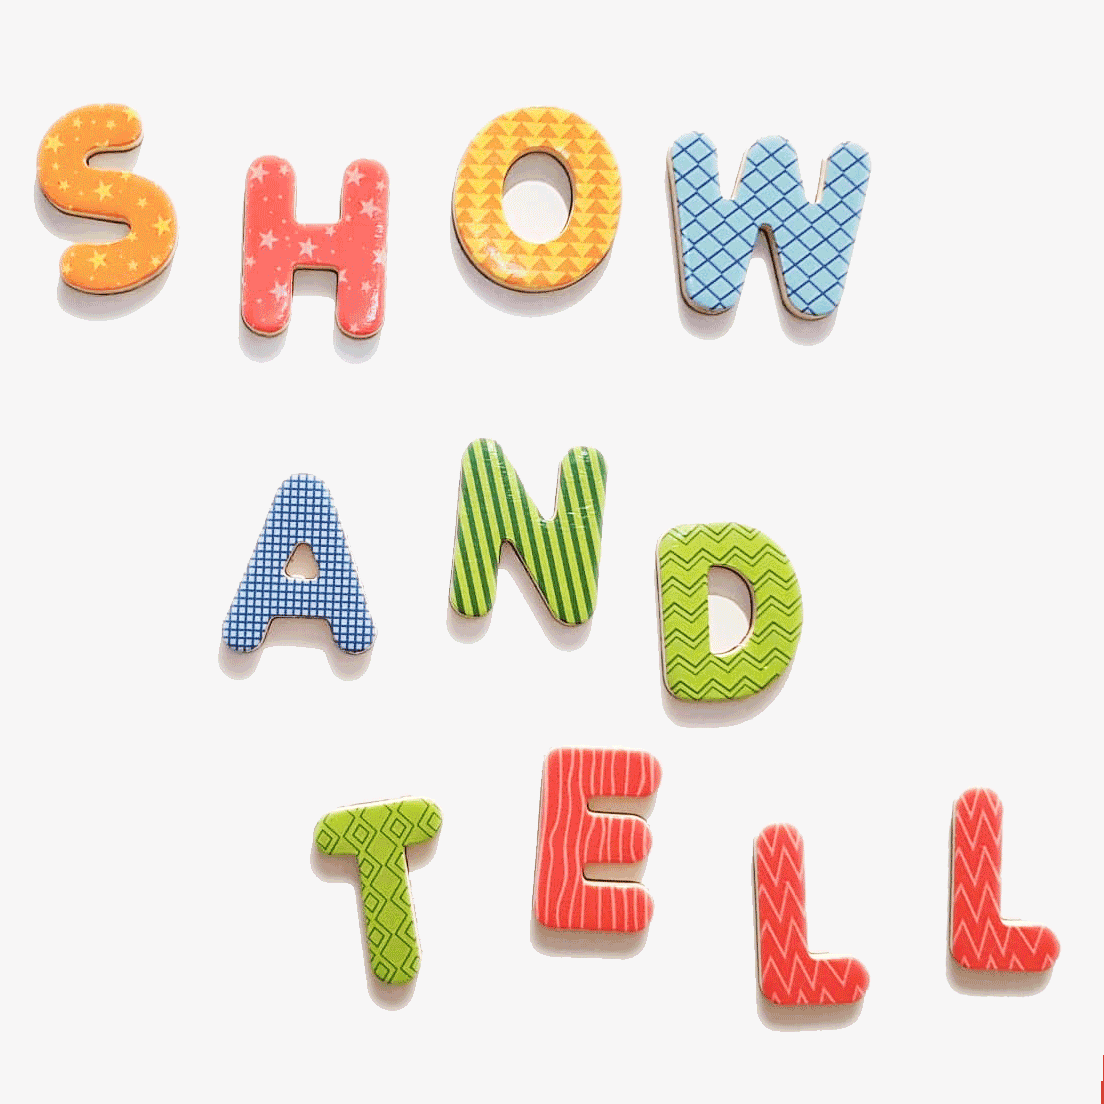 image for “Show & Tell”